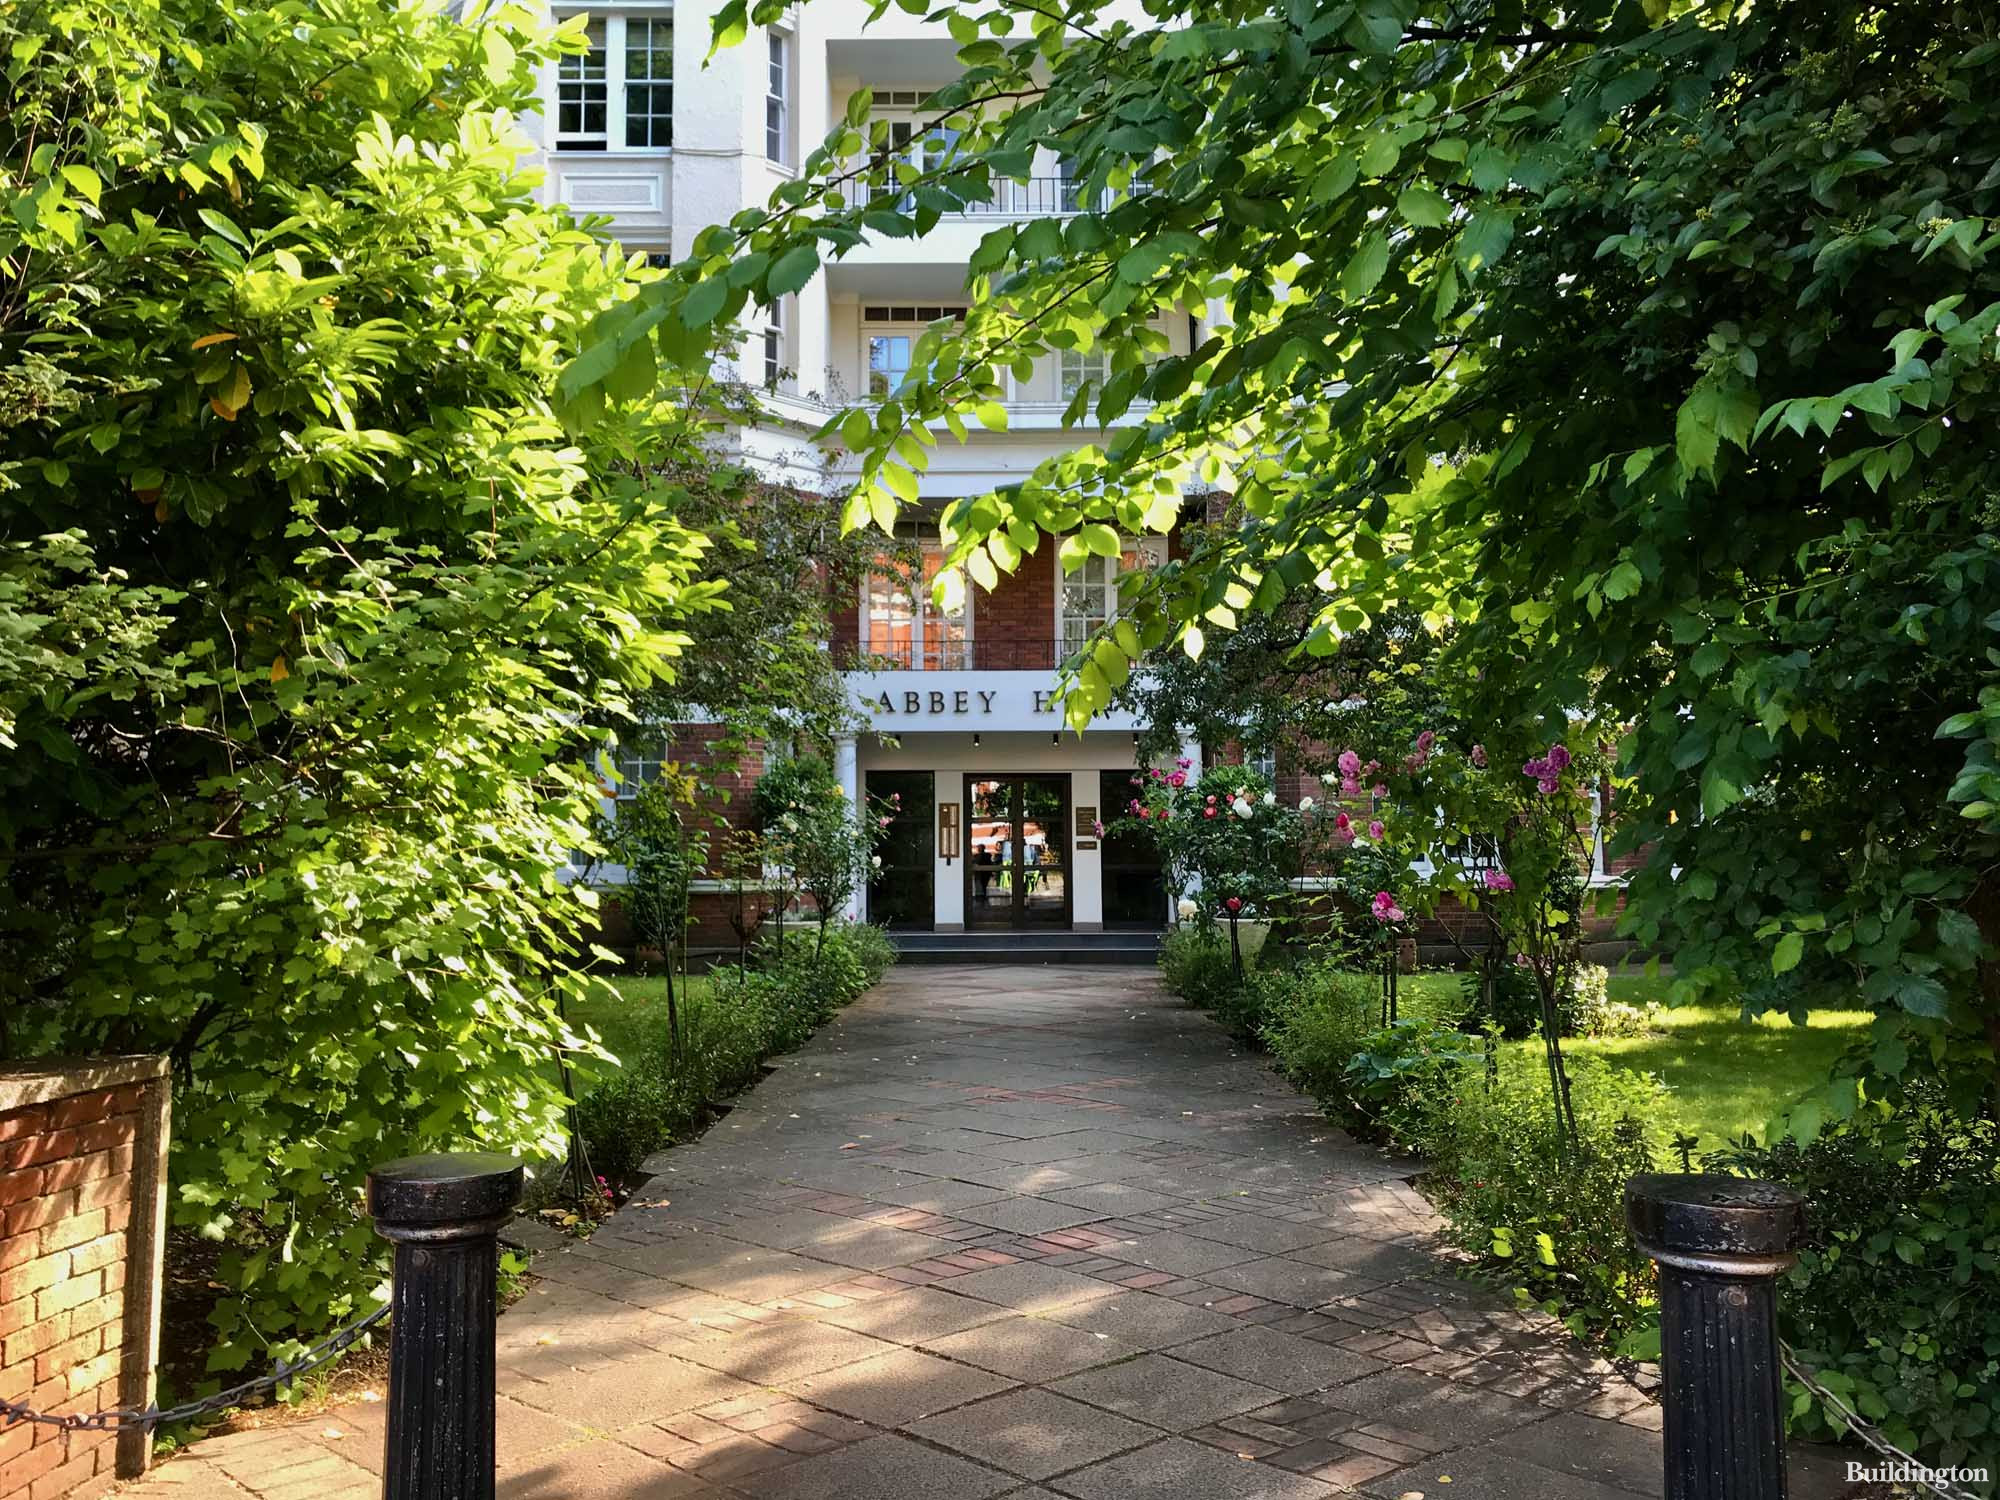 Entrance to Abbey House on Abbey Road. The building is next to Abbey Road Studios in St John's Wood, London NW8.